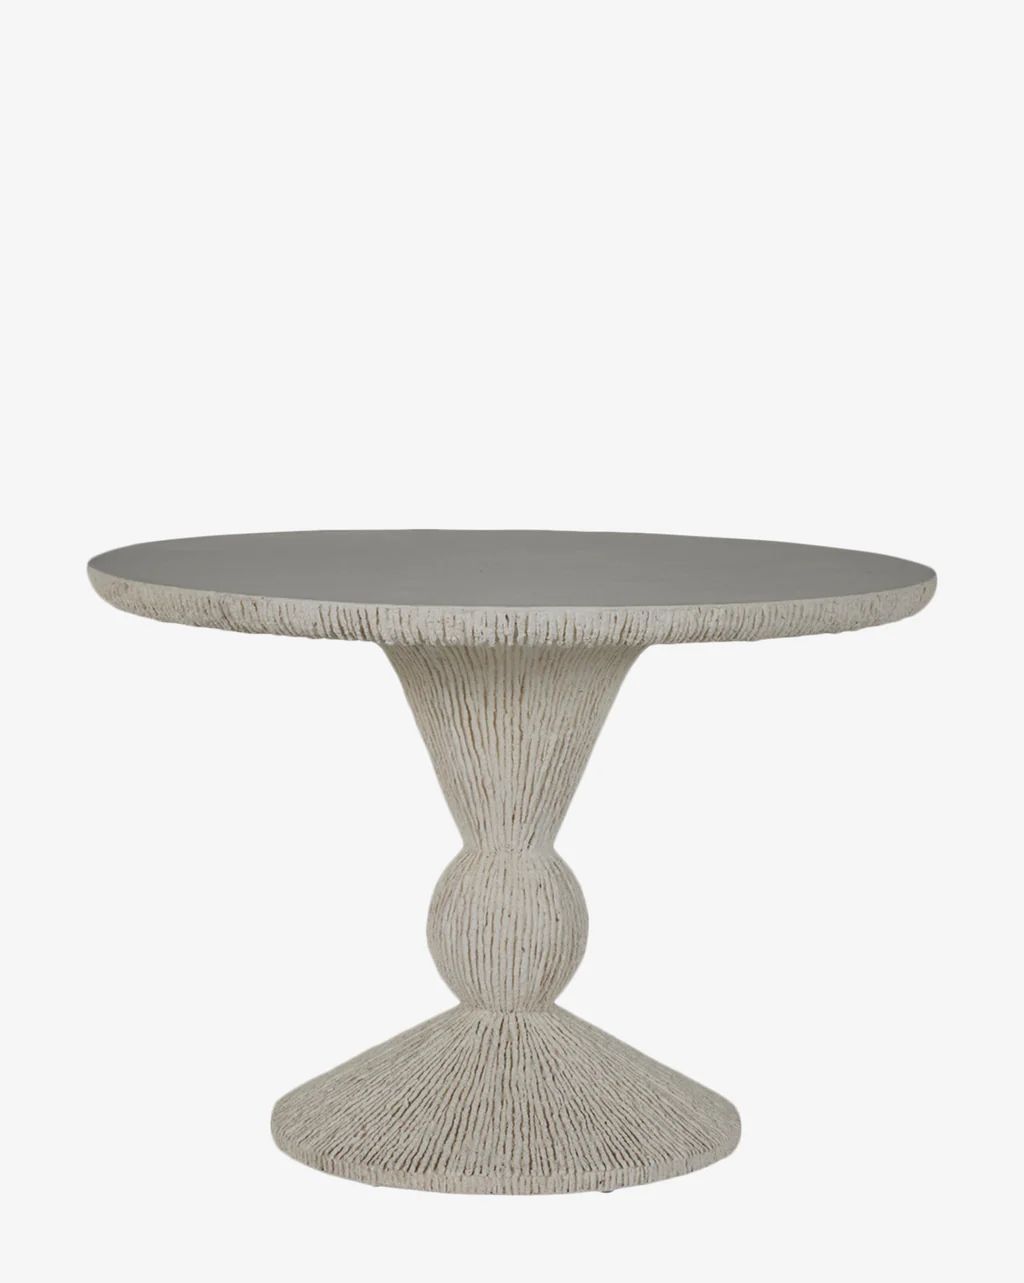 Kyler Dining Table | McGee & Co.